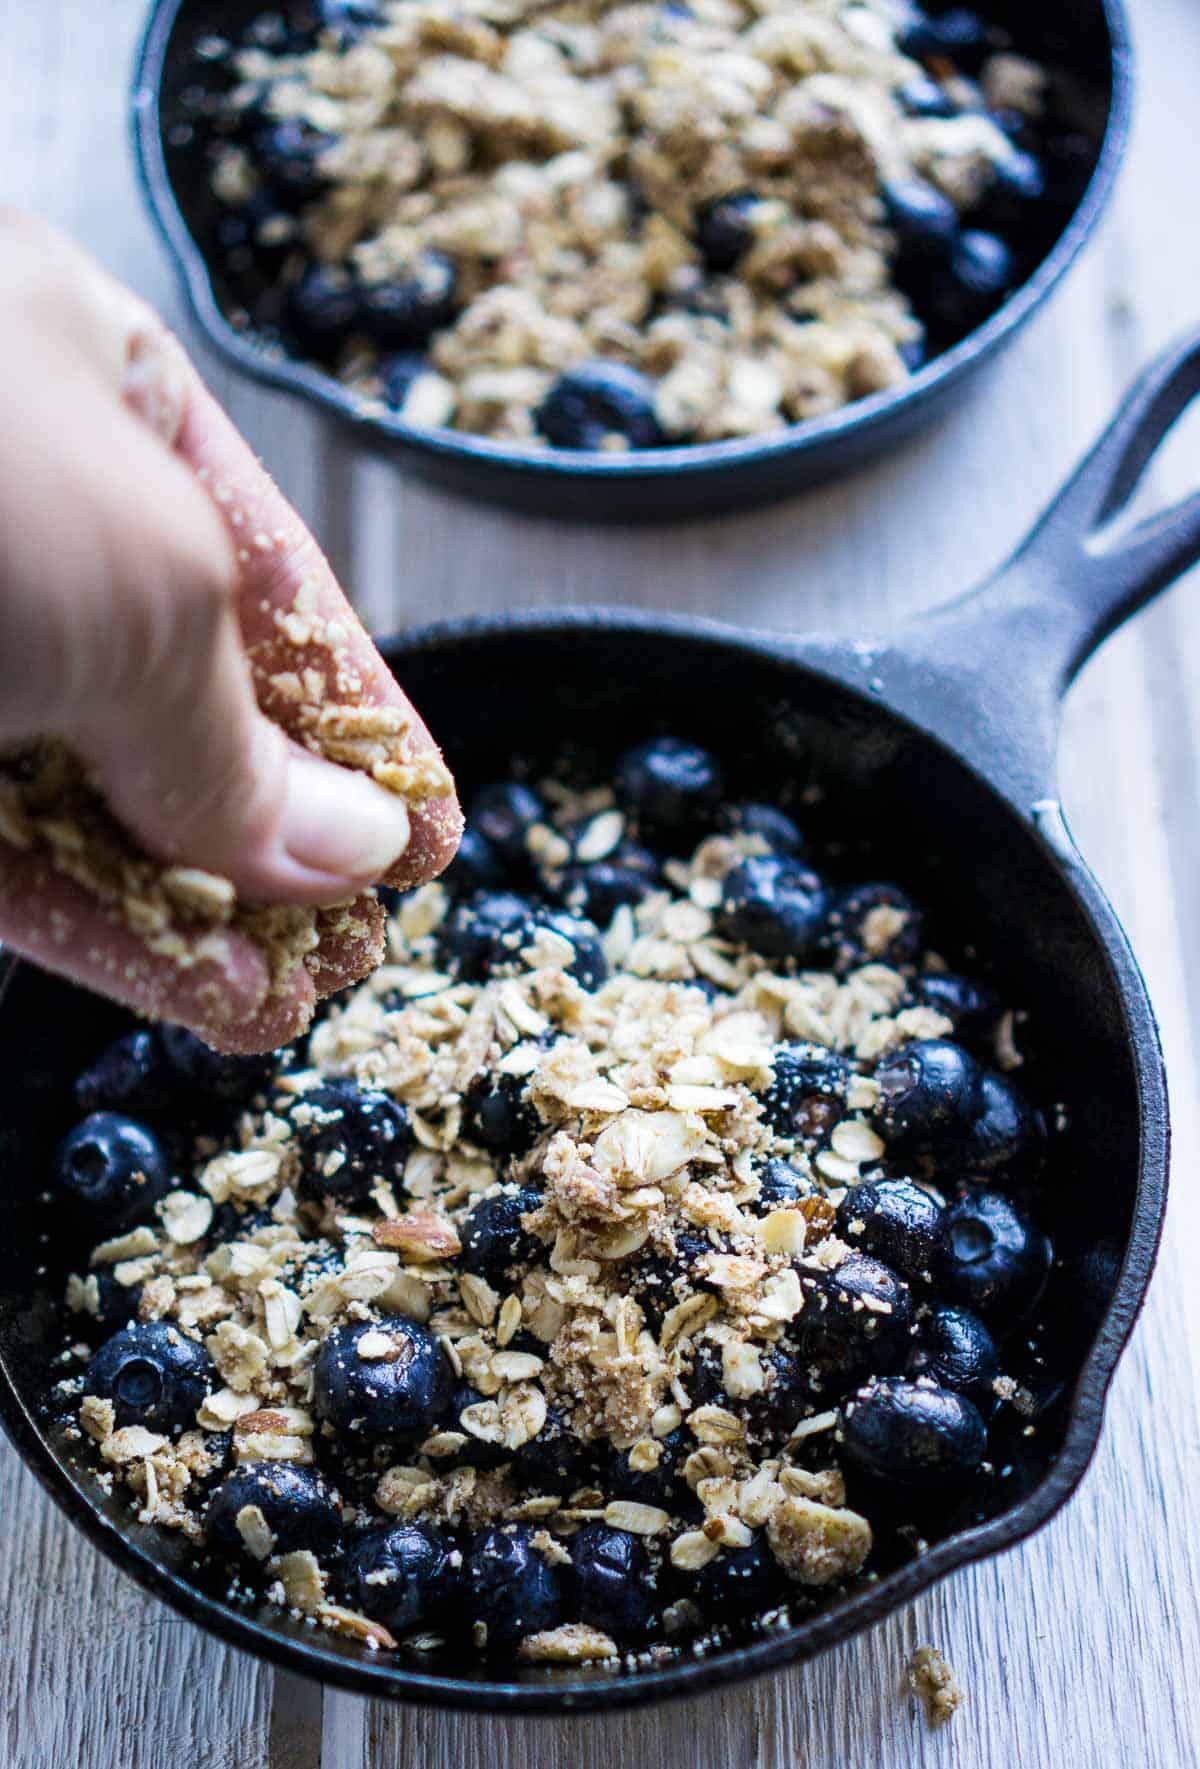 oat topping is sprinkled over blueberries in iron skillet